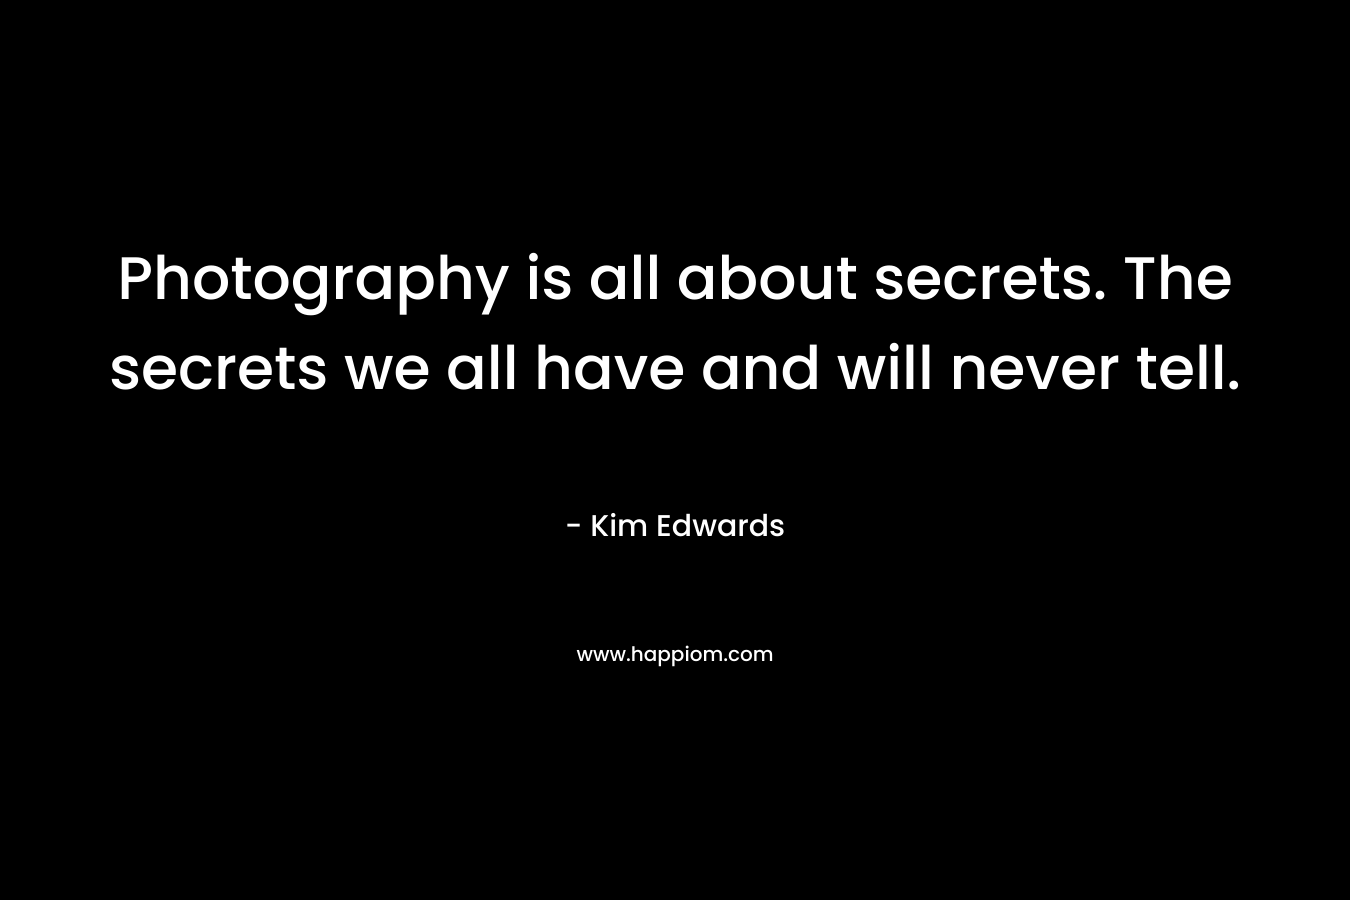 Photography is all about secrets. The secrets we all have and will never tell. – Kim Edwards